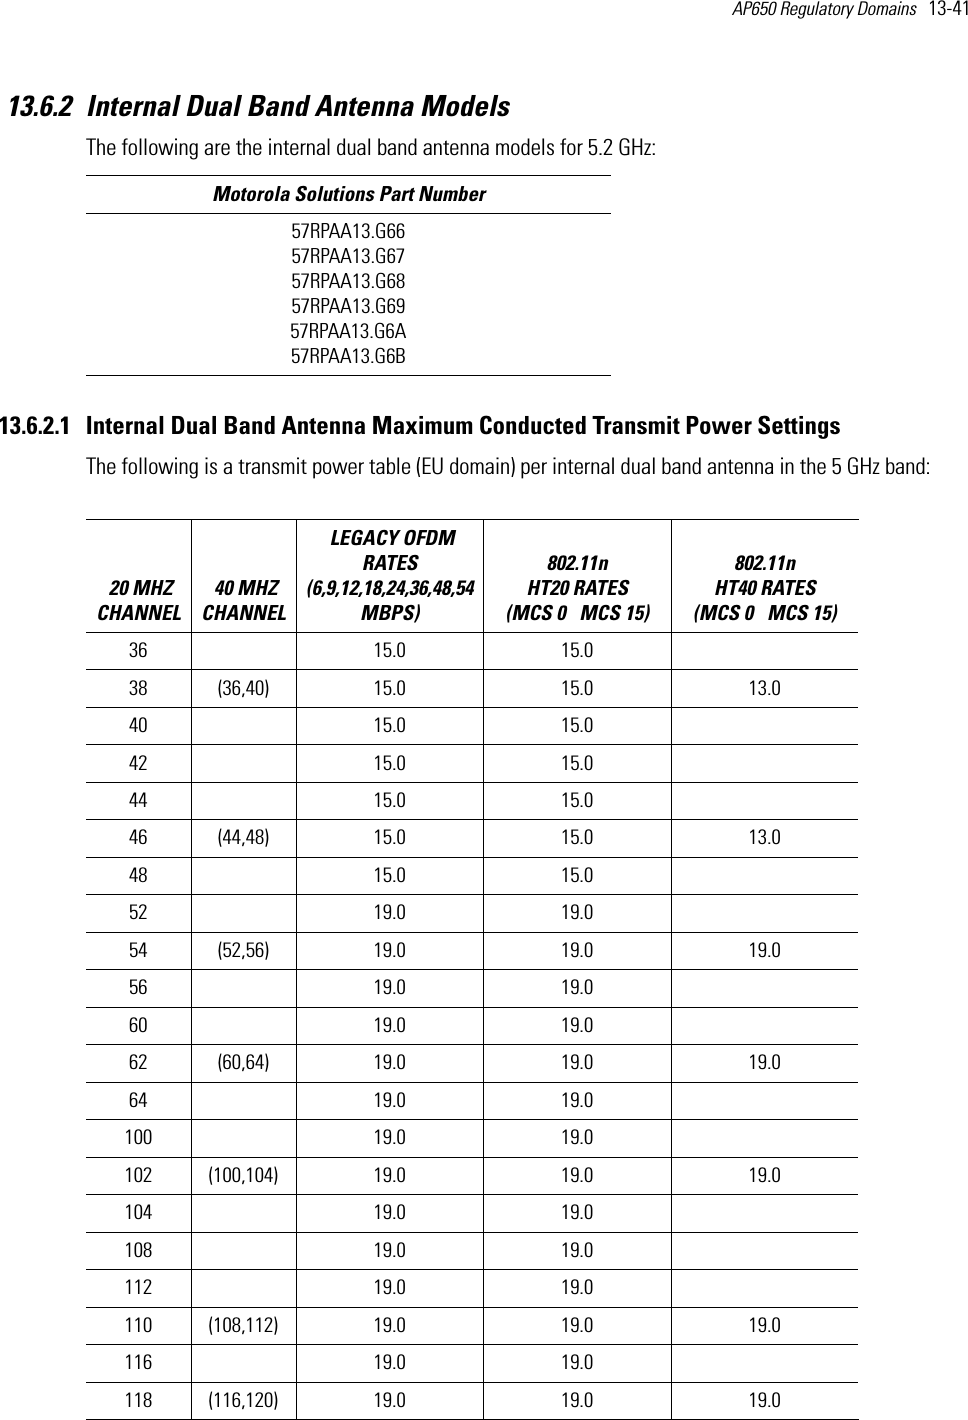 AP650 Regulatory Domains   13-41 13.6.2 Internal Dual Band Antenna ModelsThe following are the internal dual band antenna models for 5.2 GHz:13.6.2.1 Internal Dual Band Antenna Maximum Conducted Transmit Power SettingsThe following is a transmit power table (EU domain) per internal dual band antenna in the 5 GHz band: Motorola Solutions Part Number57RPAA13.G66 57RPAA13.G6757RPAA13.G6857RPAA13.G6957RPAA13.G6A57RPAA13.G6B 20 MHZ CHANNEL 40 MHZ CHANNEL LEGACY OFDM RATES (6,9,12,18,24,36,48,54 MBPS) 802.11n HT20 RATES (MCS 0   MCS 15)802.11n HT40 RATES (MCS 0   MCS 15) 36 15.0 15.038 (36,40) 15.0 15.0 13.040 15.0 15.042 15.0 15.044 15.0 15.046 (44,48) 15.0 15.0 13.048 15.0 15.052 19.0 19.054 (52,56) 19.0 19.0 19.056 19.0 19.060 19.0 19.062 (60,64) 19.0 19.0 19.064 19.0 19.0100 19.0 19.0102 (100,104) 19.0 19.0 19.0104 19.0 19.0108 19.0 19.0112 19.0 19.0110 (108,112) 19.0 19.0 19.0116 19.0 19.0118 (116,120) 19.0 19.0 19.0